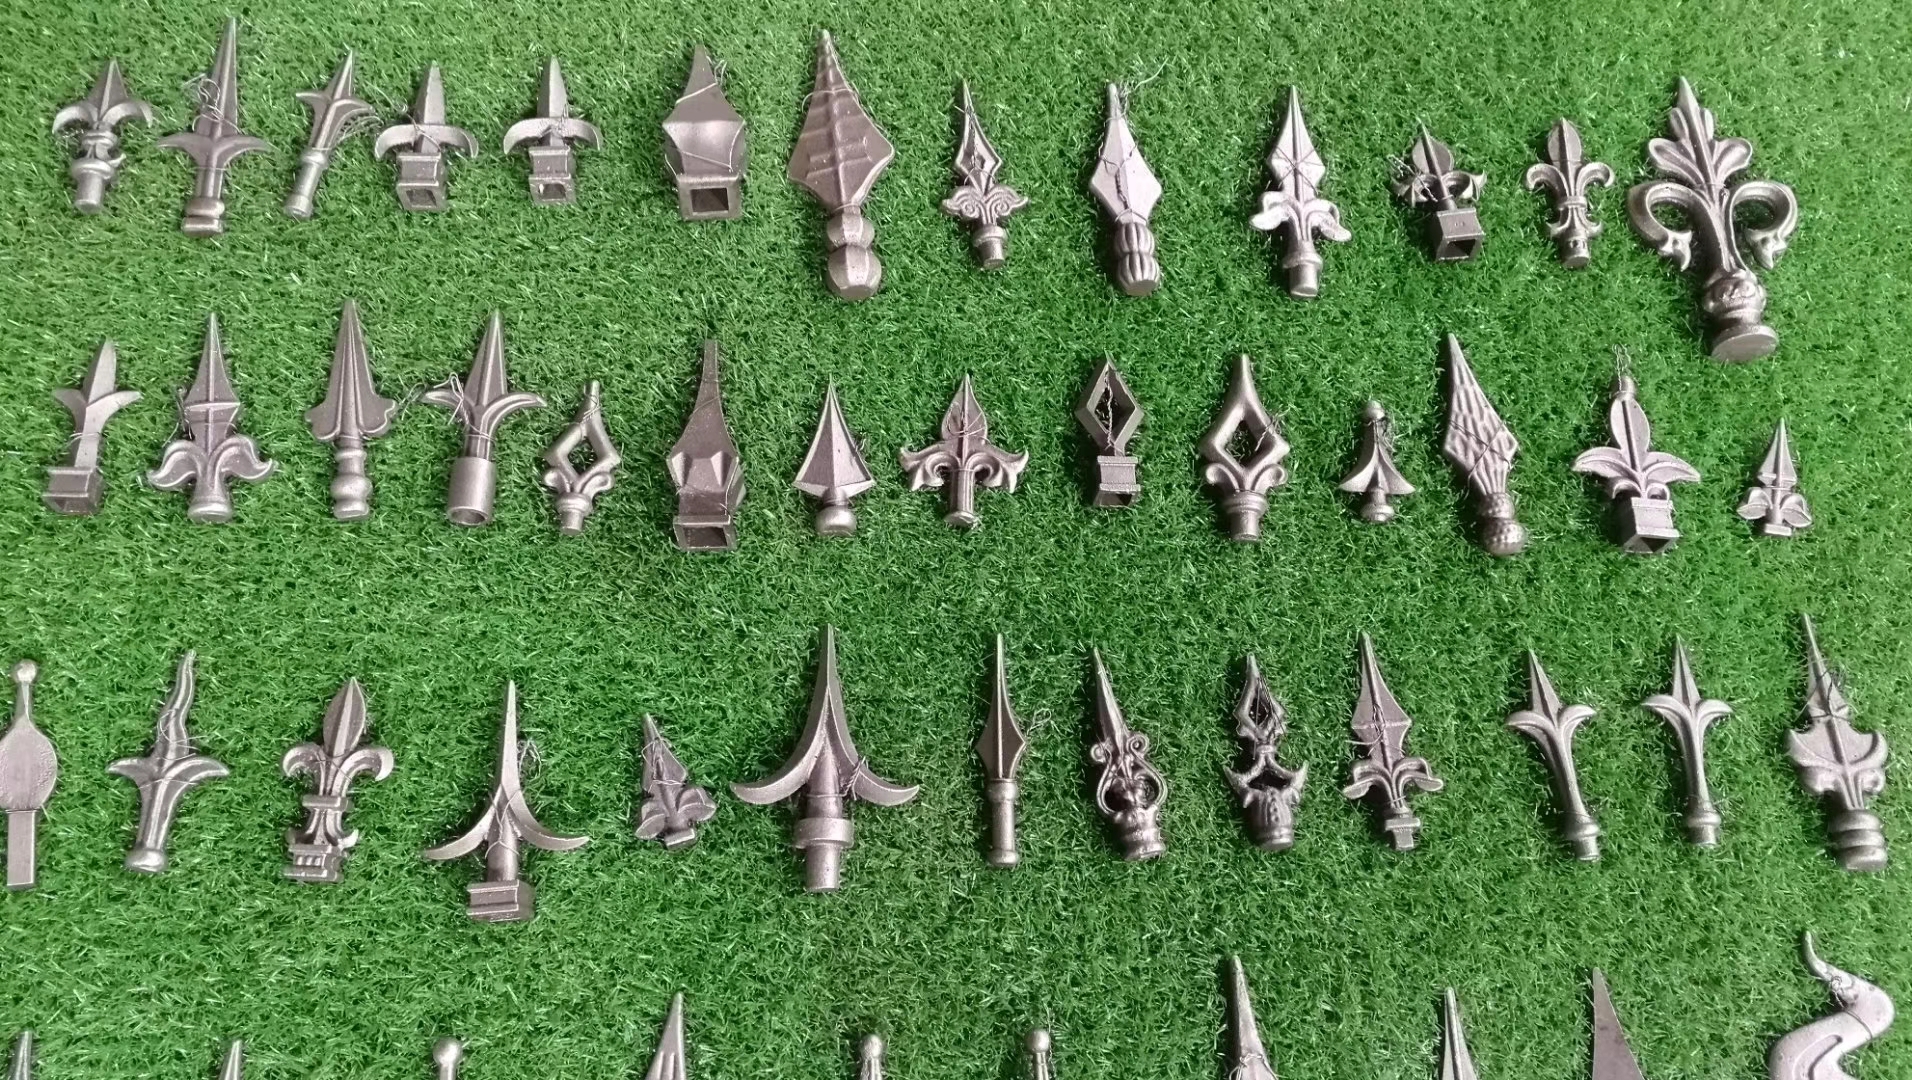 Decorative-cast-iron-speartop-arrowheads for Wrought iron fence or Wrought iron gate